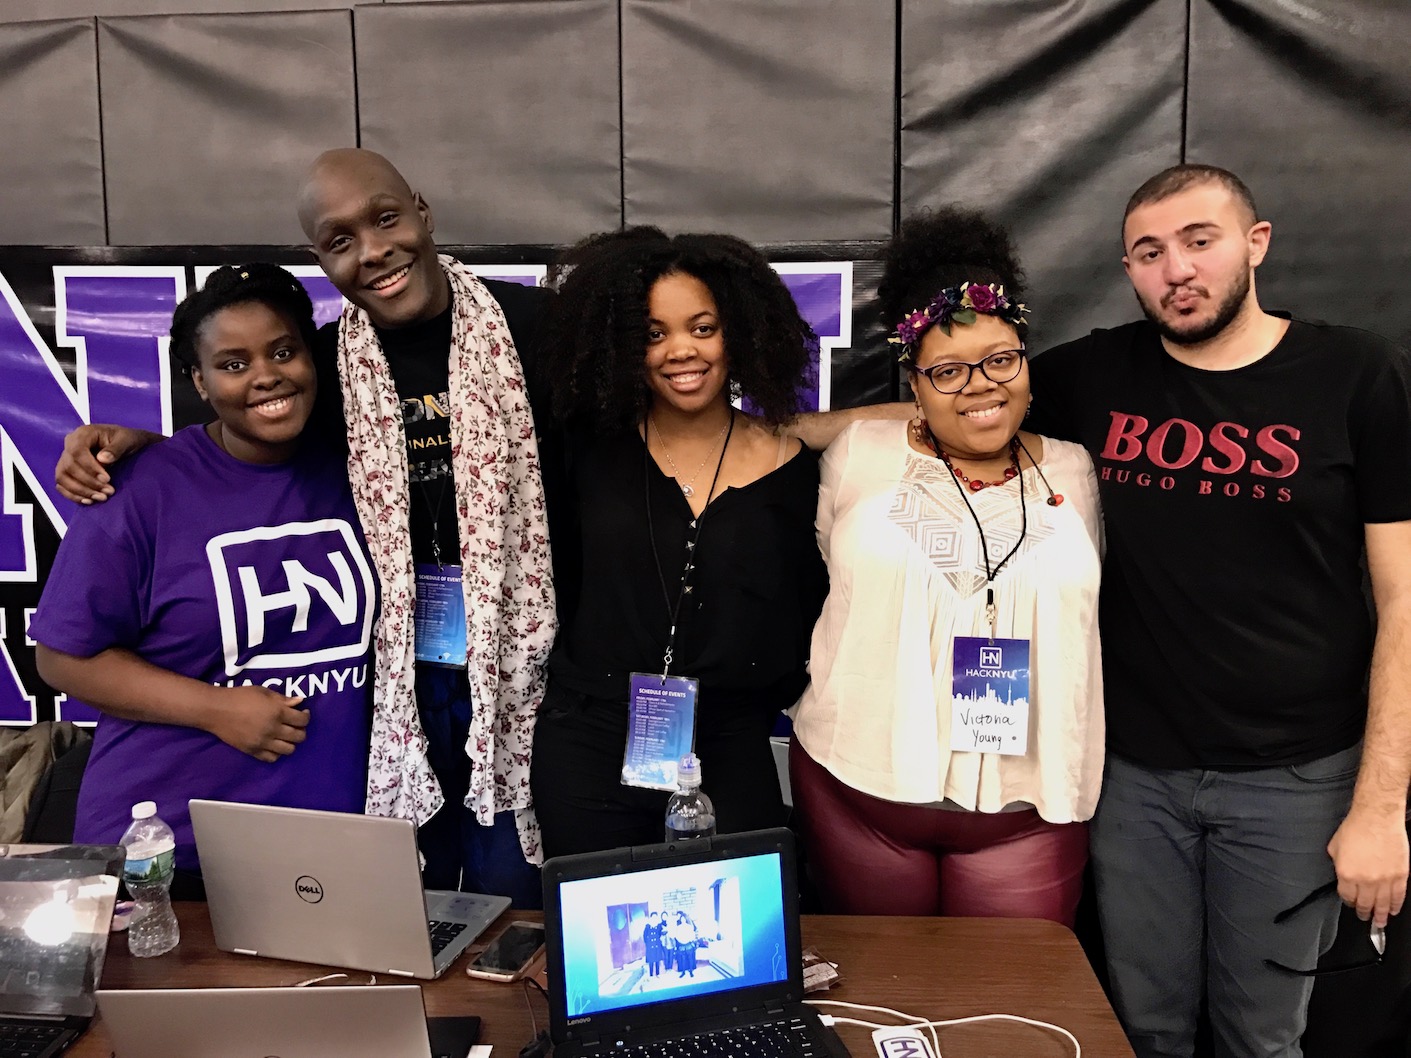 The team behind Ologee, a winner in HackNYU's sustainability and social impact category.